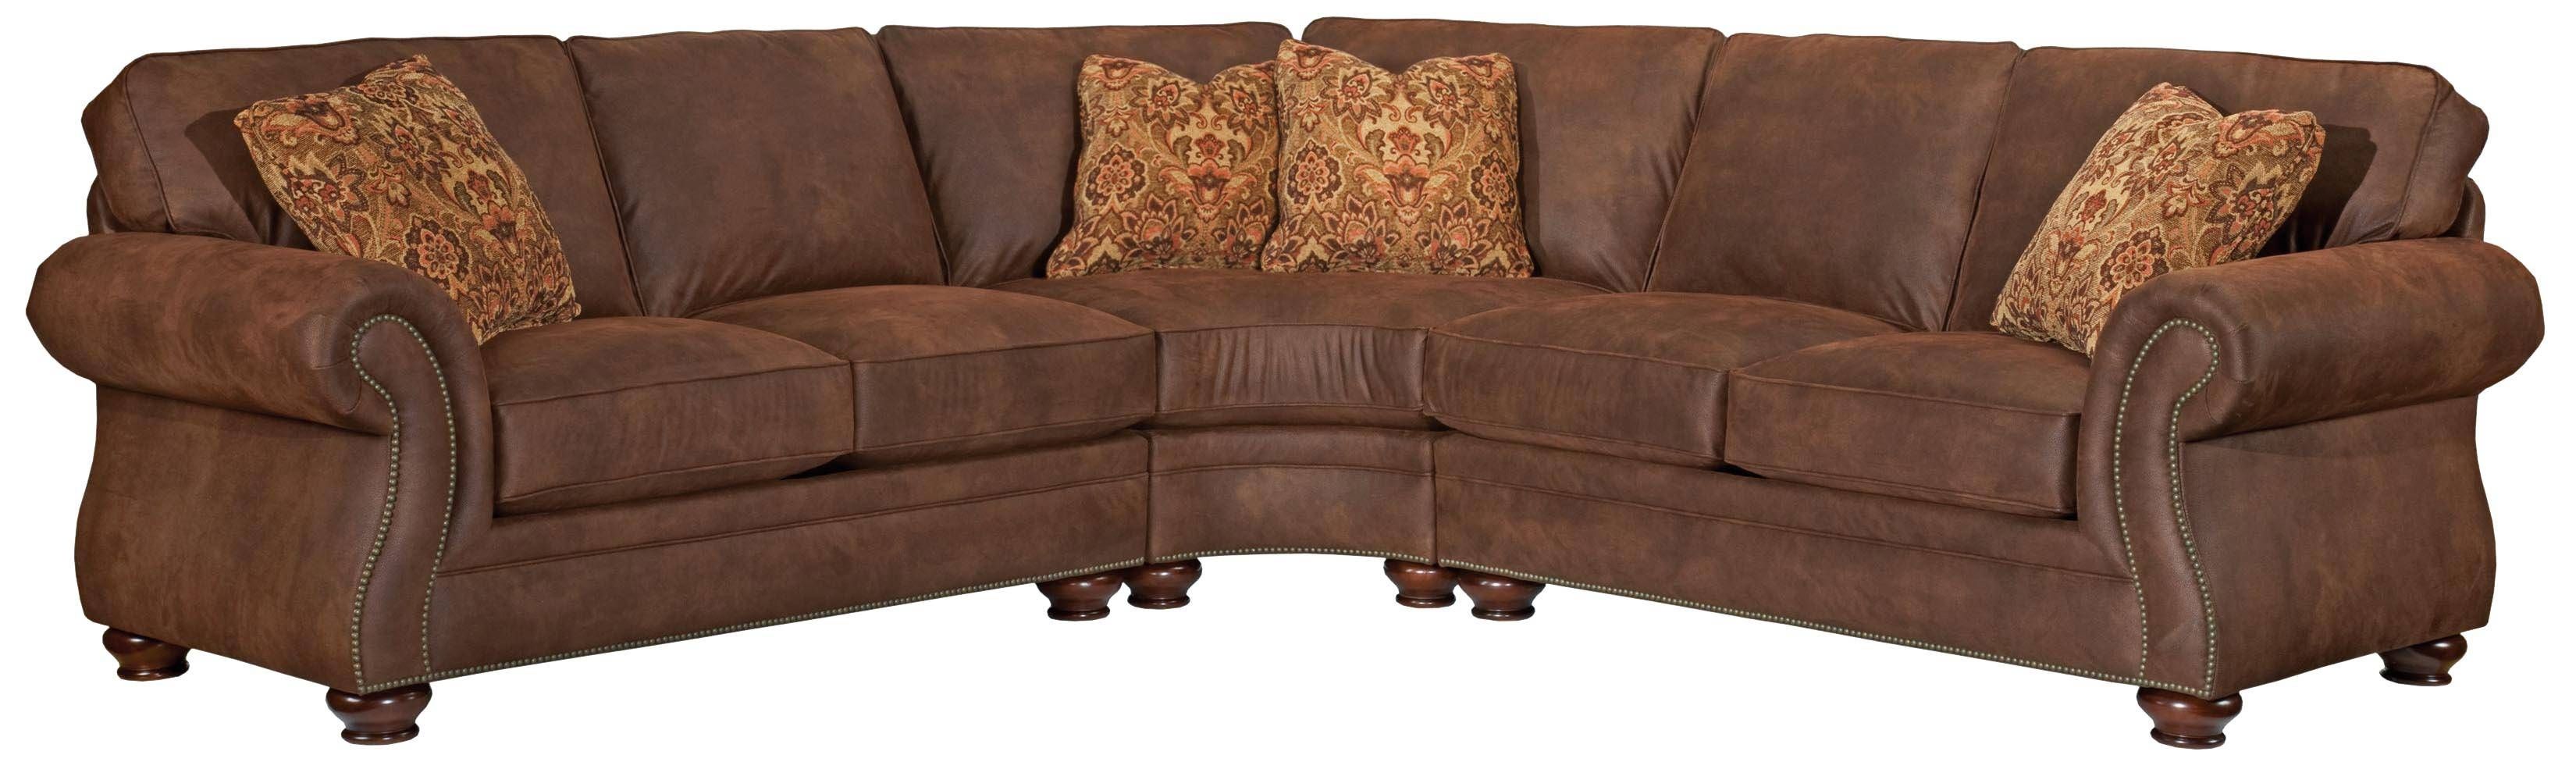 Broyhill Furniture Laramie 3 Piece Wedge Sectional Sofa – Wayside With Broyhill Sectional Sofa (Photo 1 of 30)